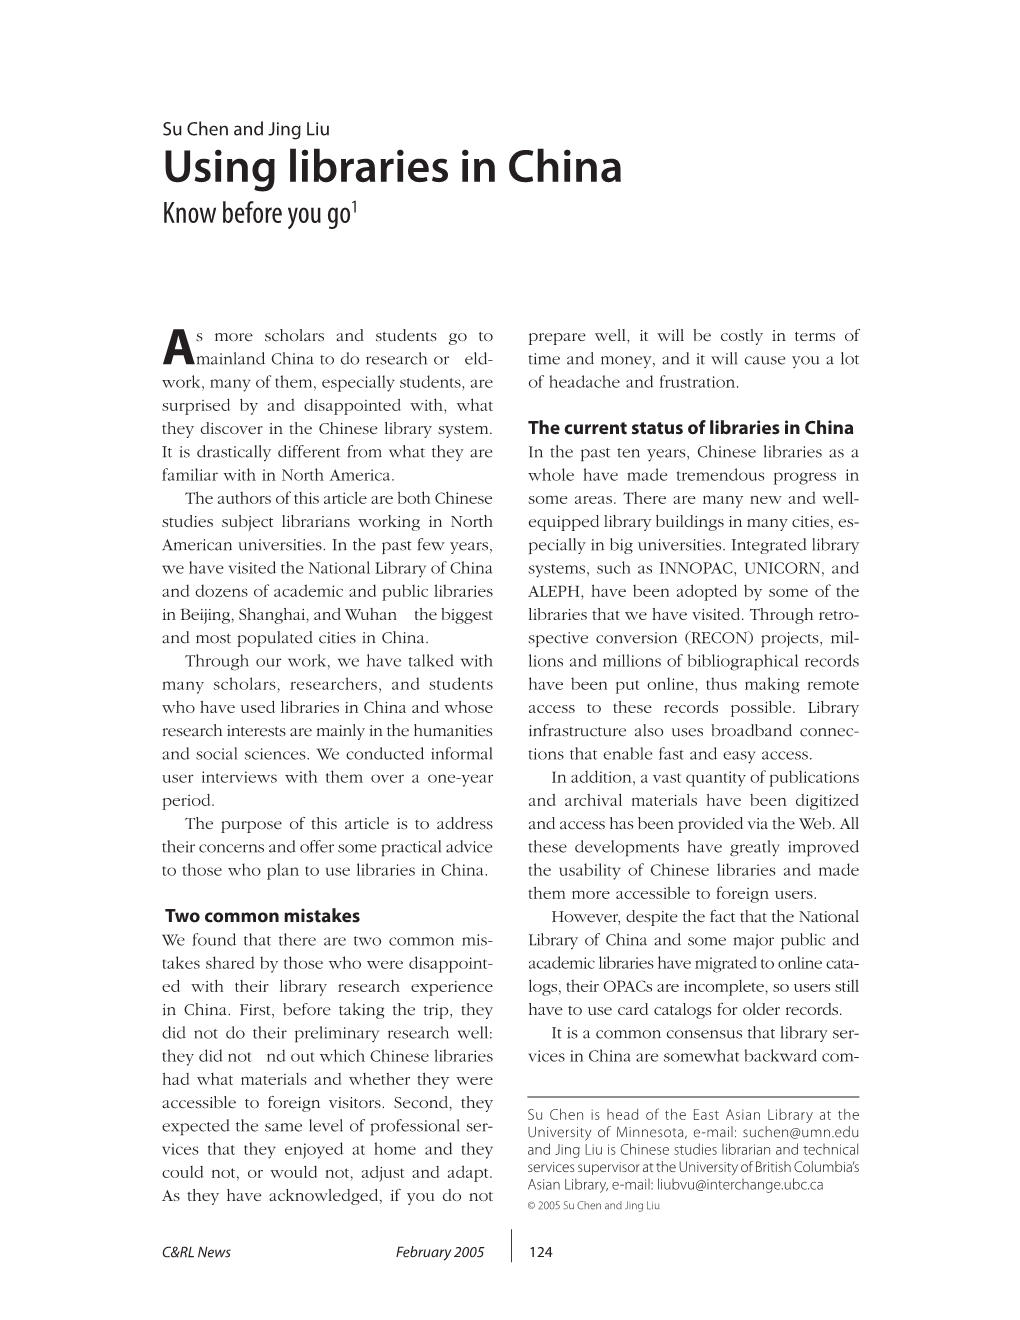 Using Libraries in China Know Before You Go1